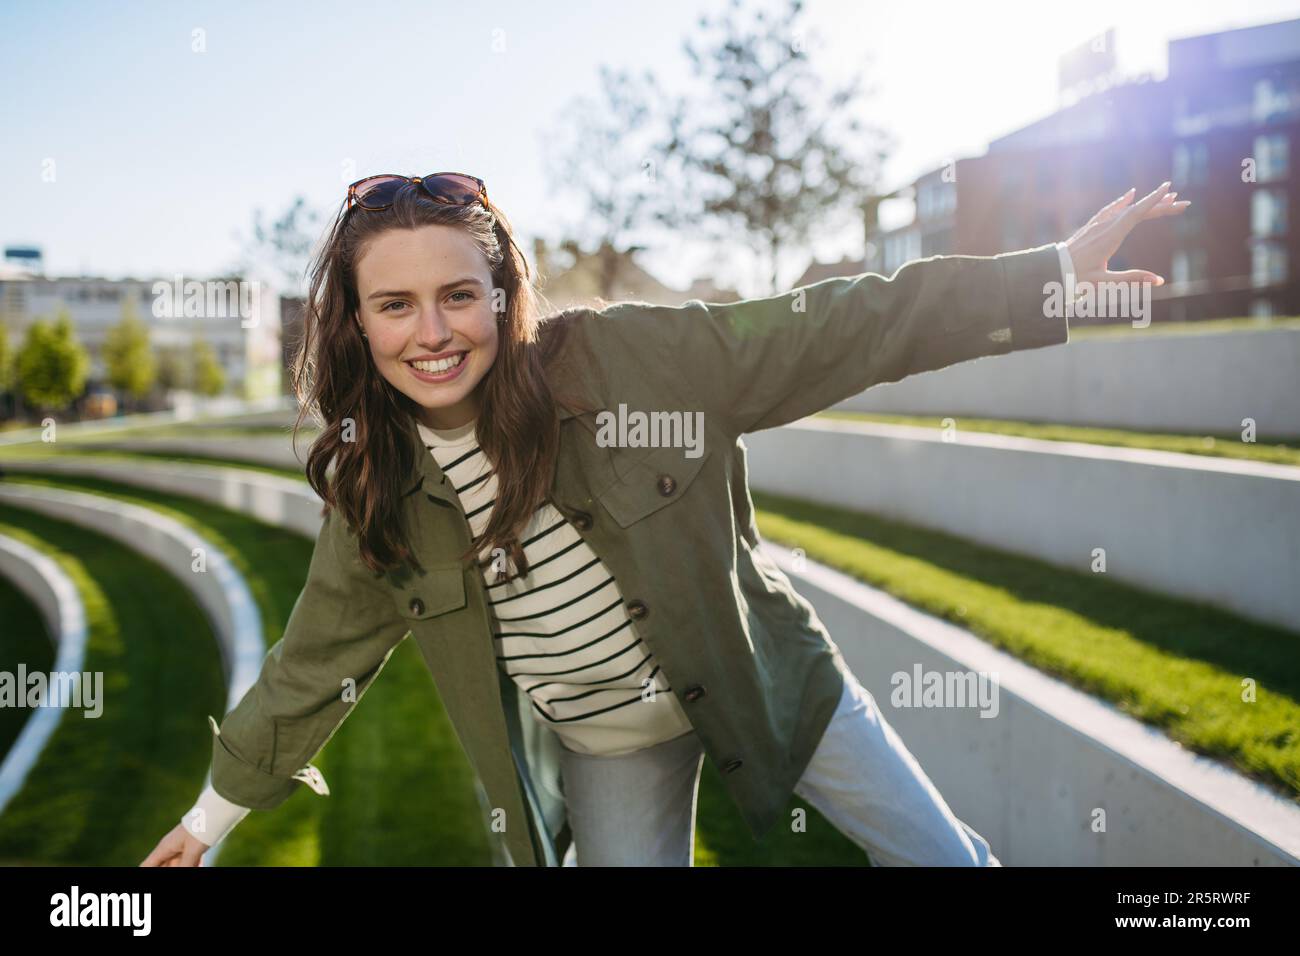 Young woman spending her free time in city park. Stock Photo